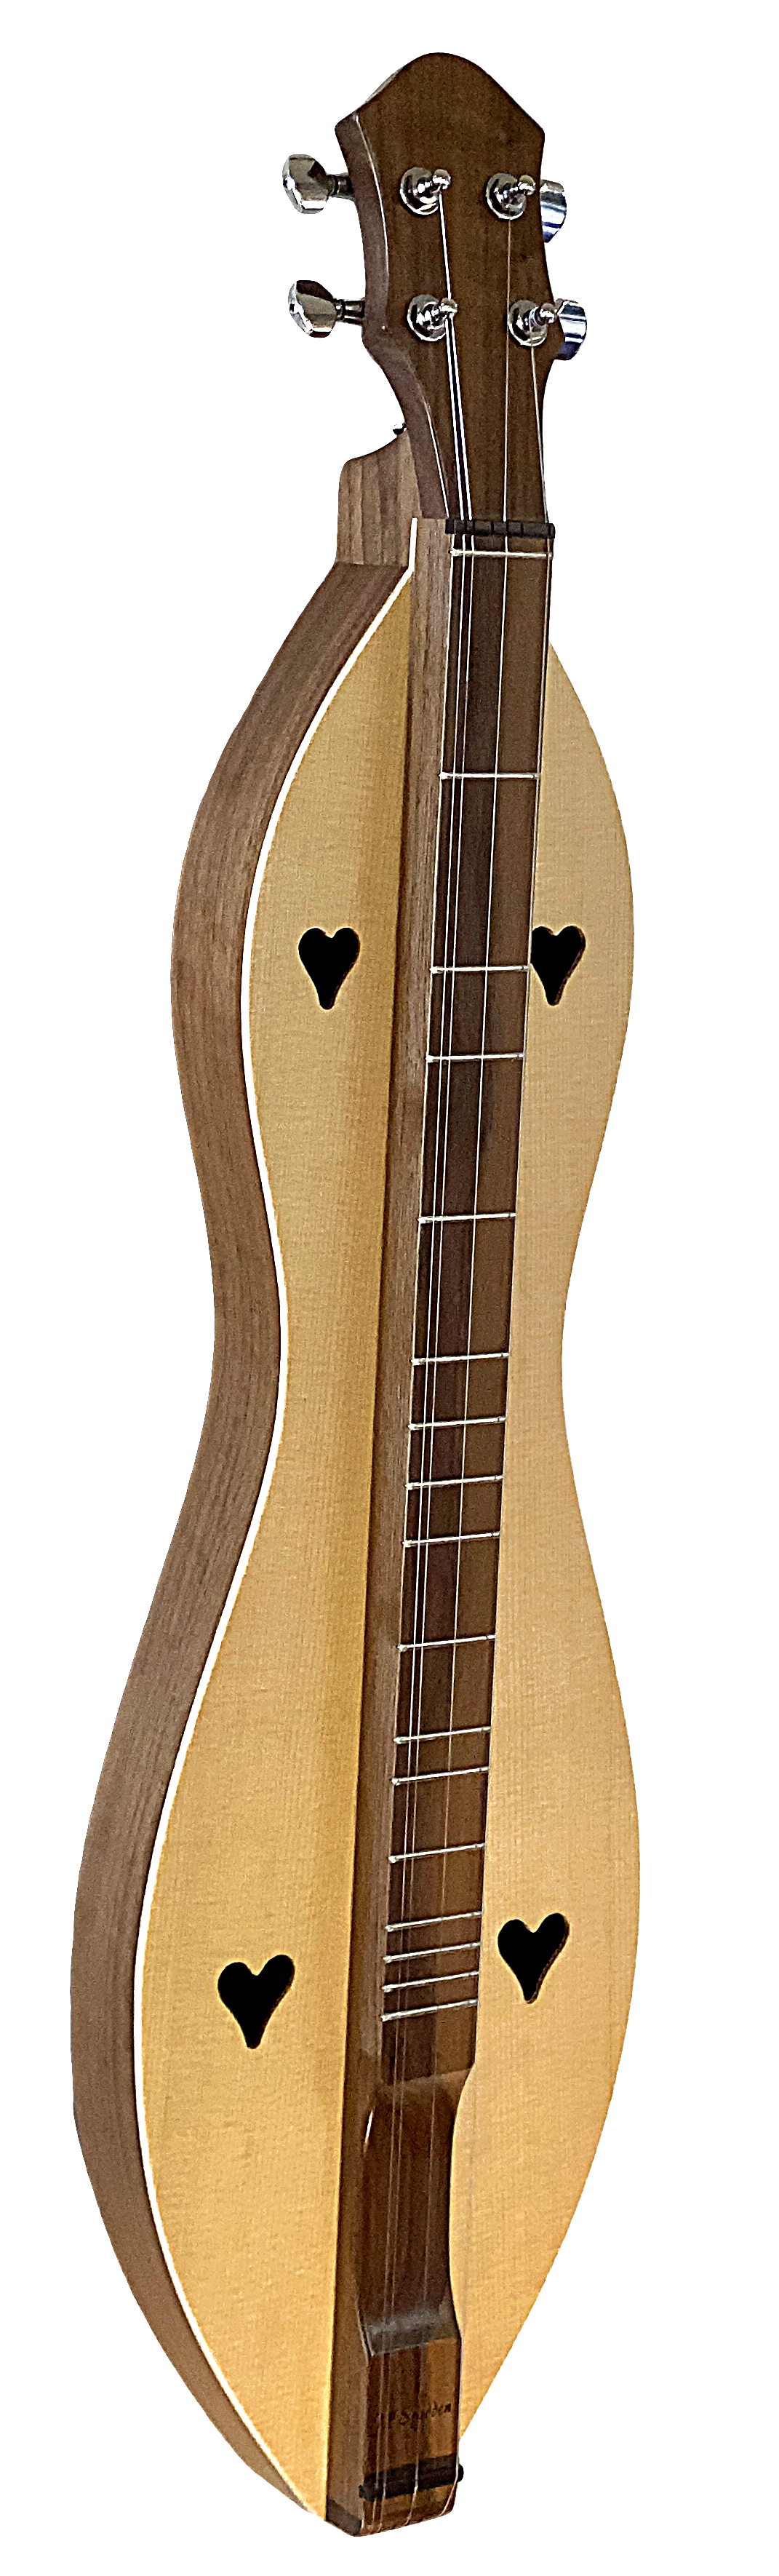 A 4 String Ginger, Flathead, Hourglass with Walnut back and sides, Spruce top (4FGWS), featuring a lifetime warranty, is showcased on a white background.